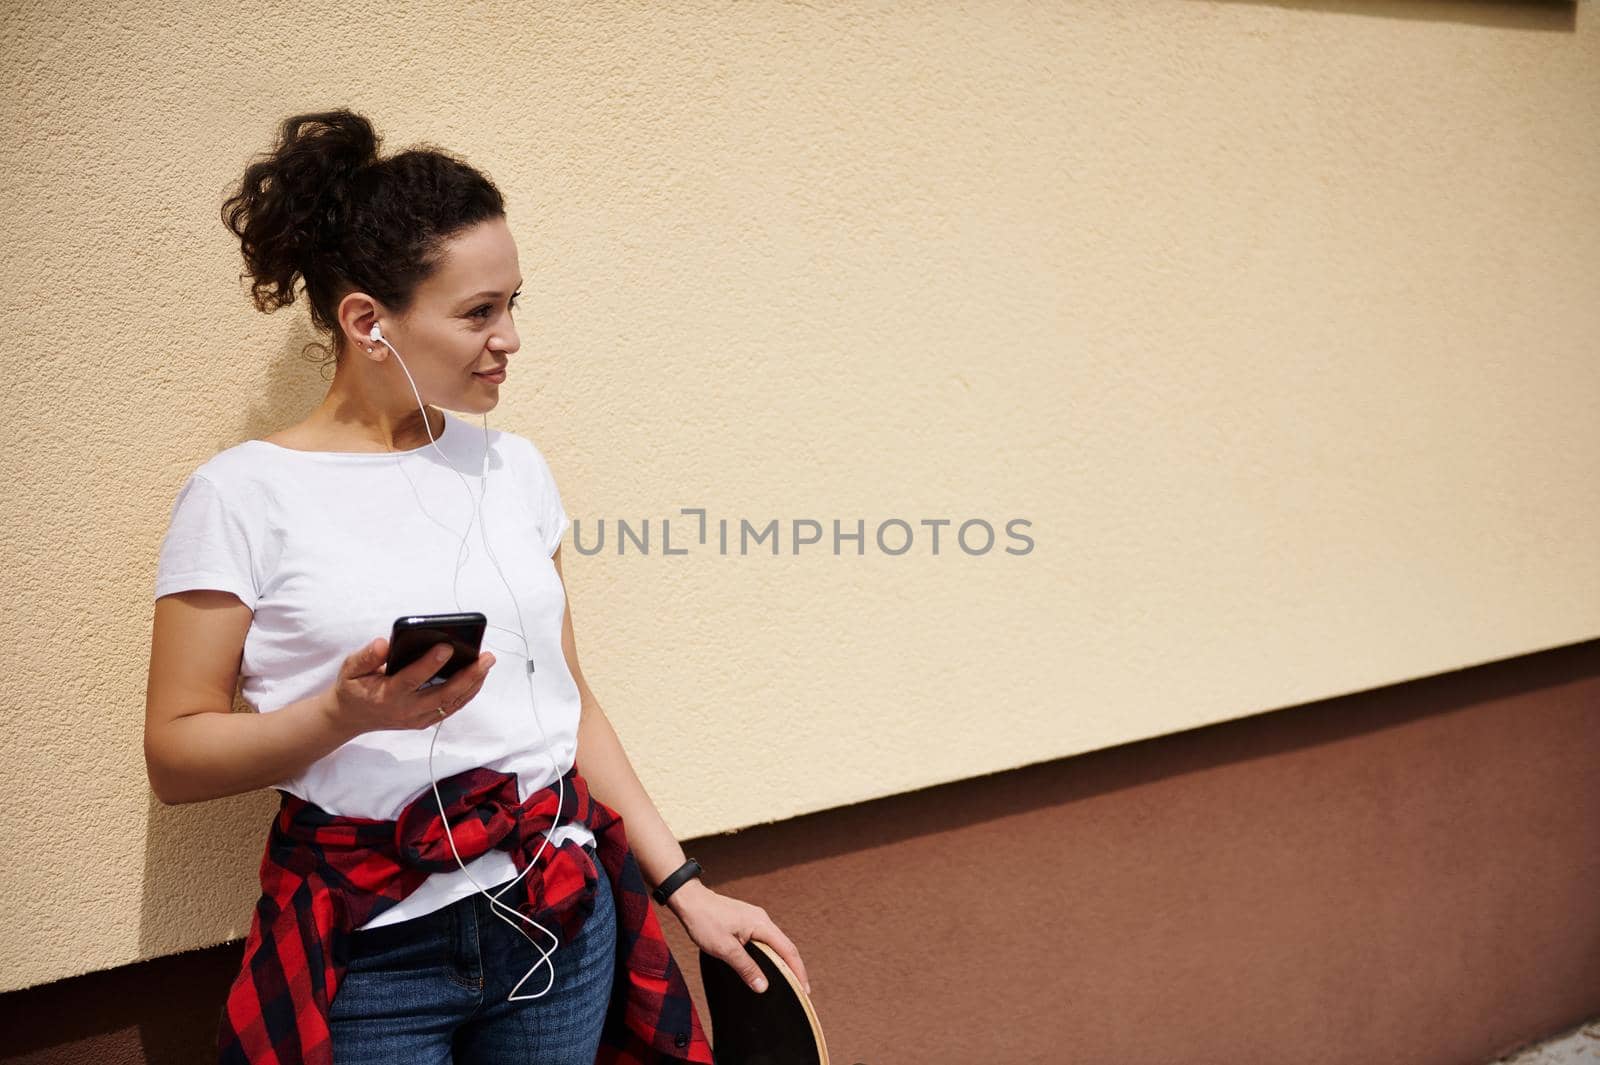 Attractive woman holding a mobile phone in one hand and a skateboard in the other, looking to the side with her back leaning against a colored wall outdoors by artgf